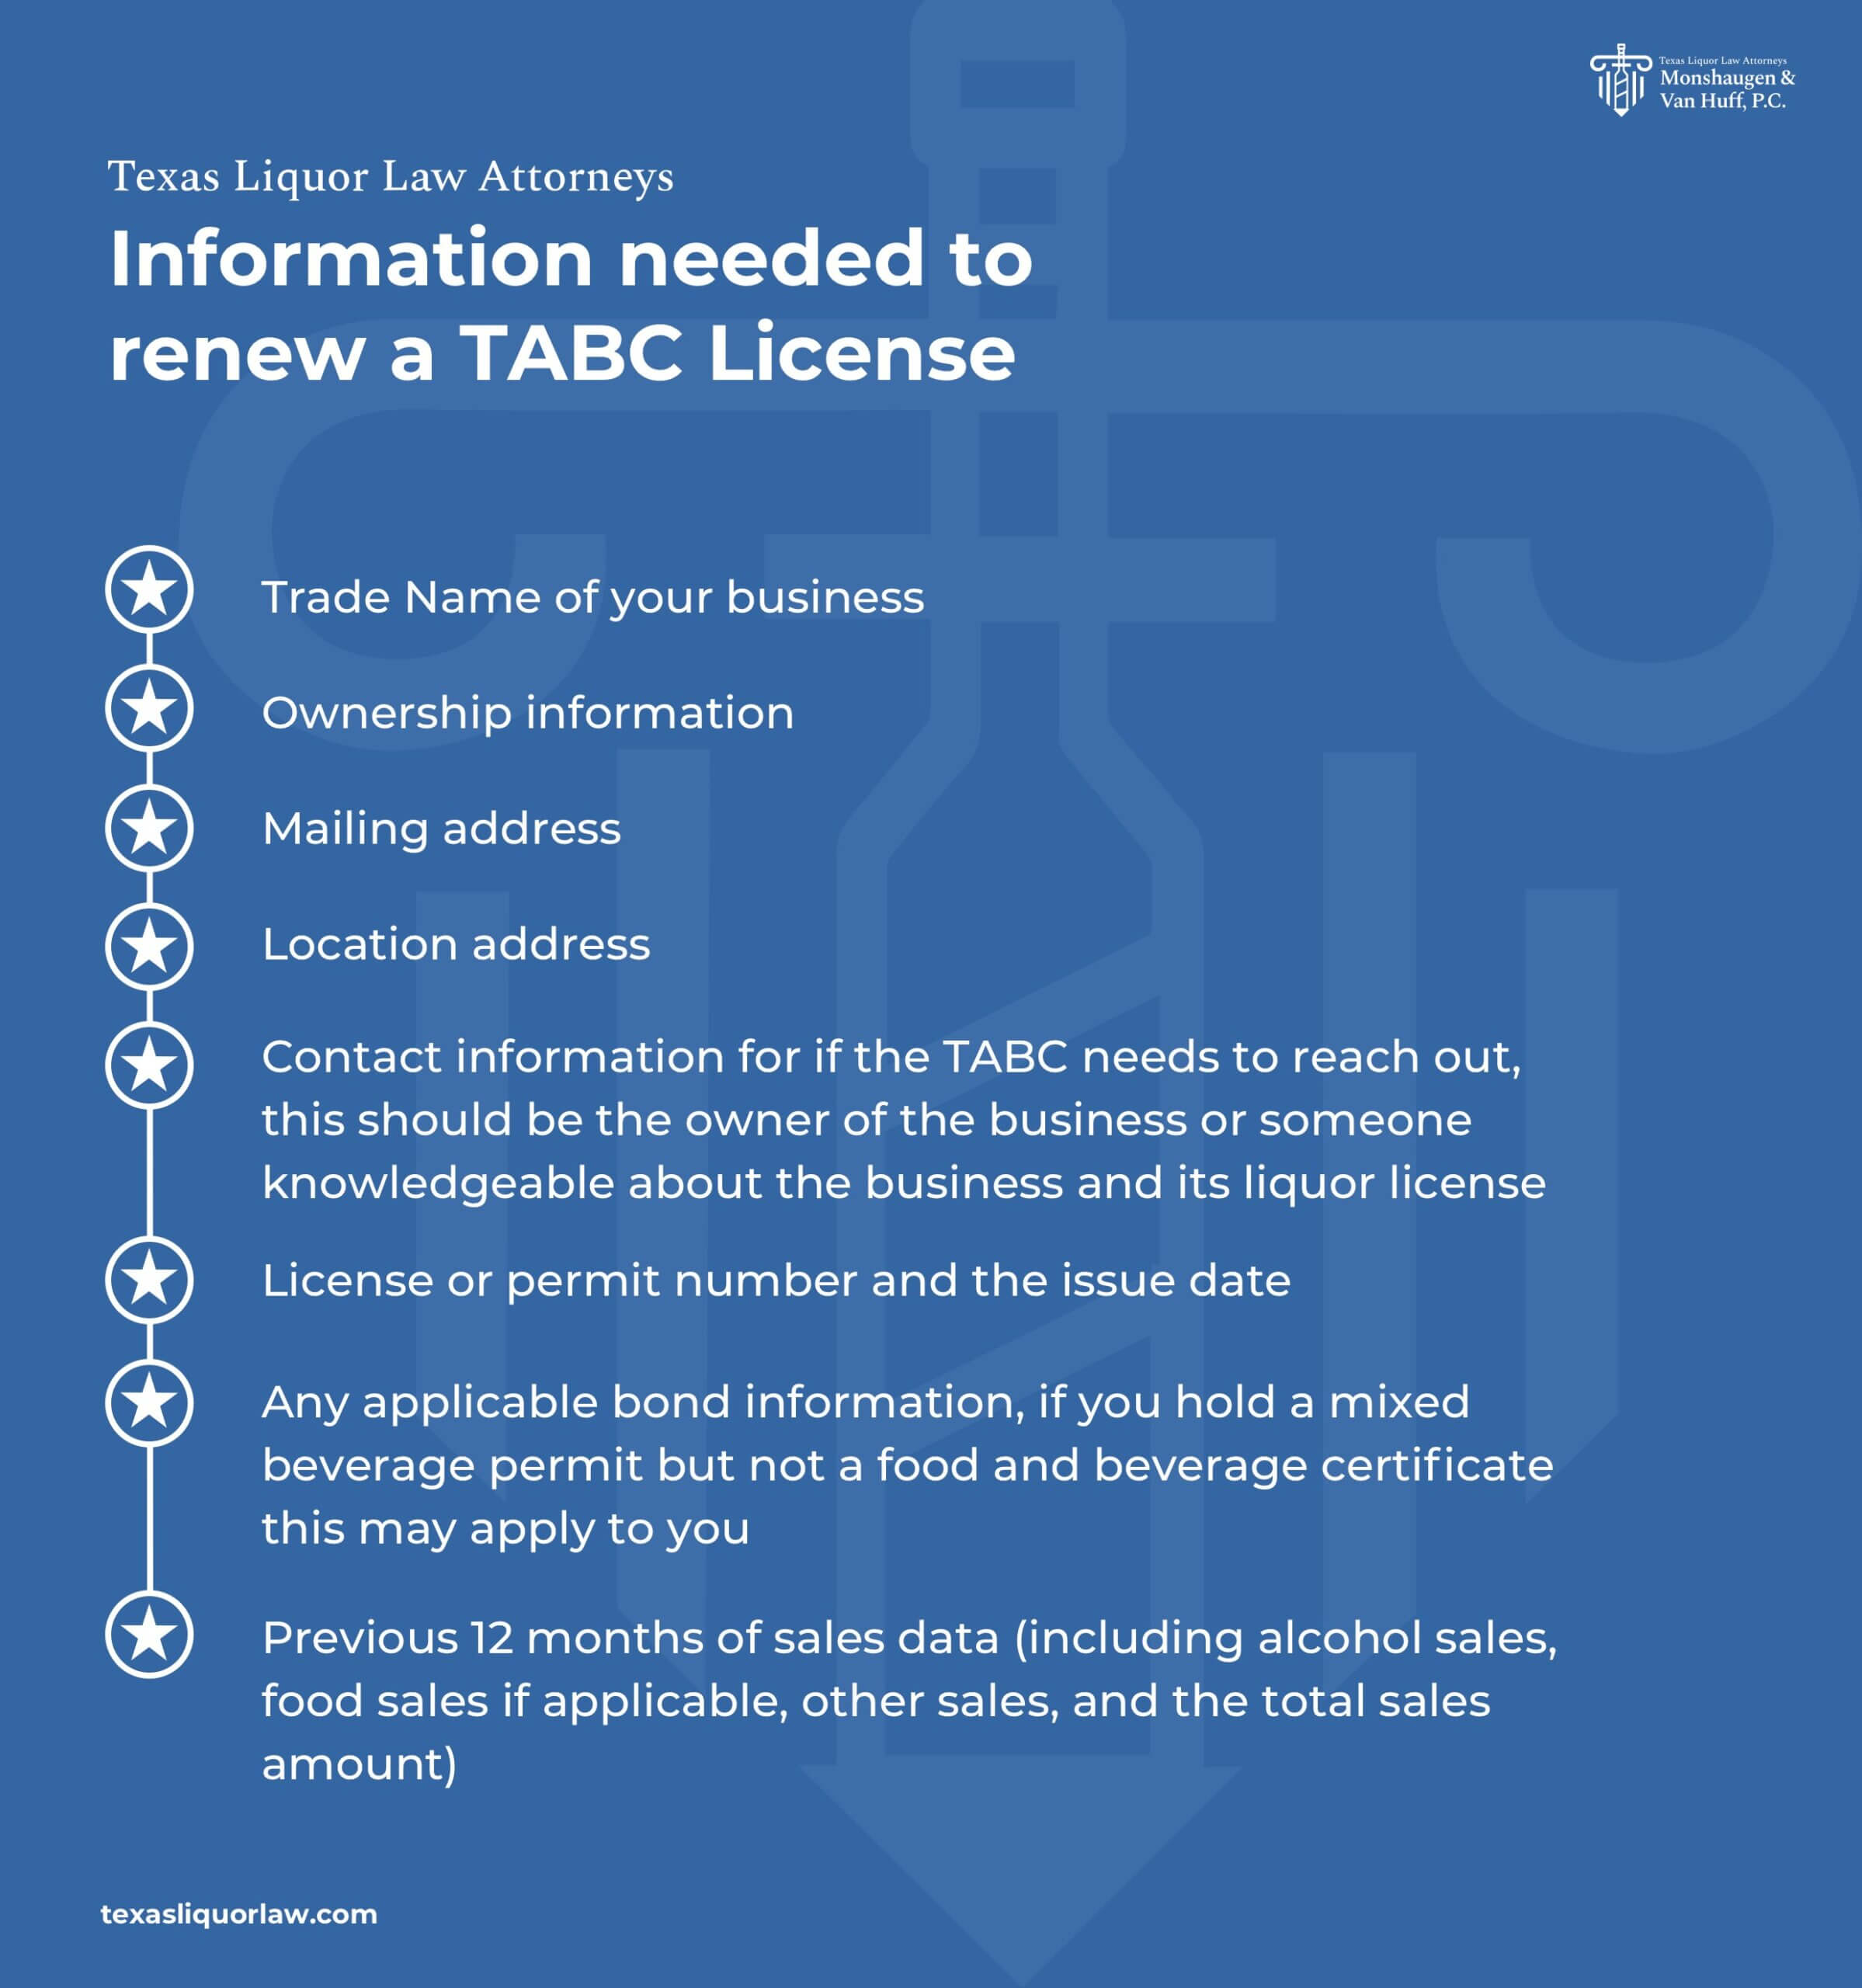 Information needed to renew a TABC License